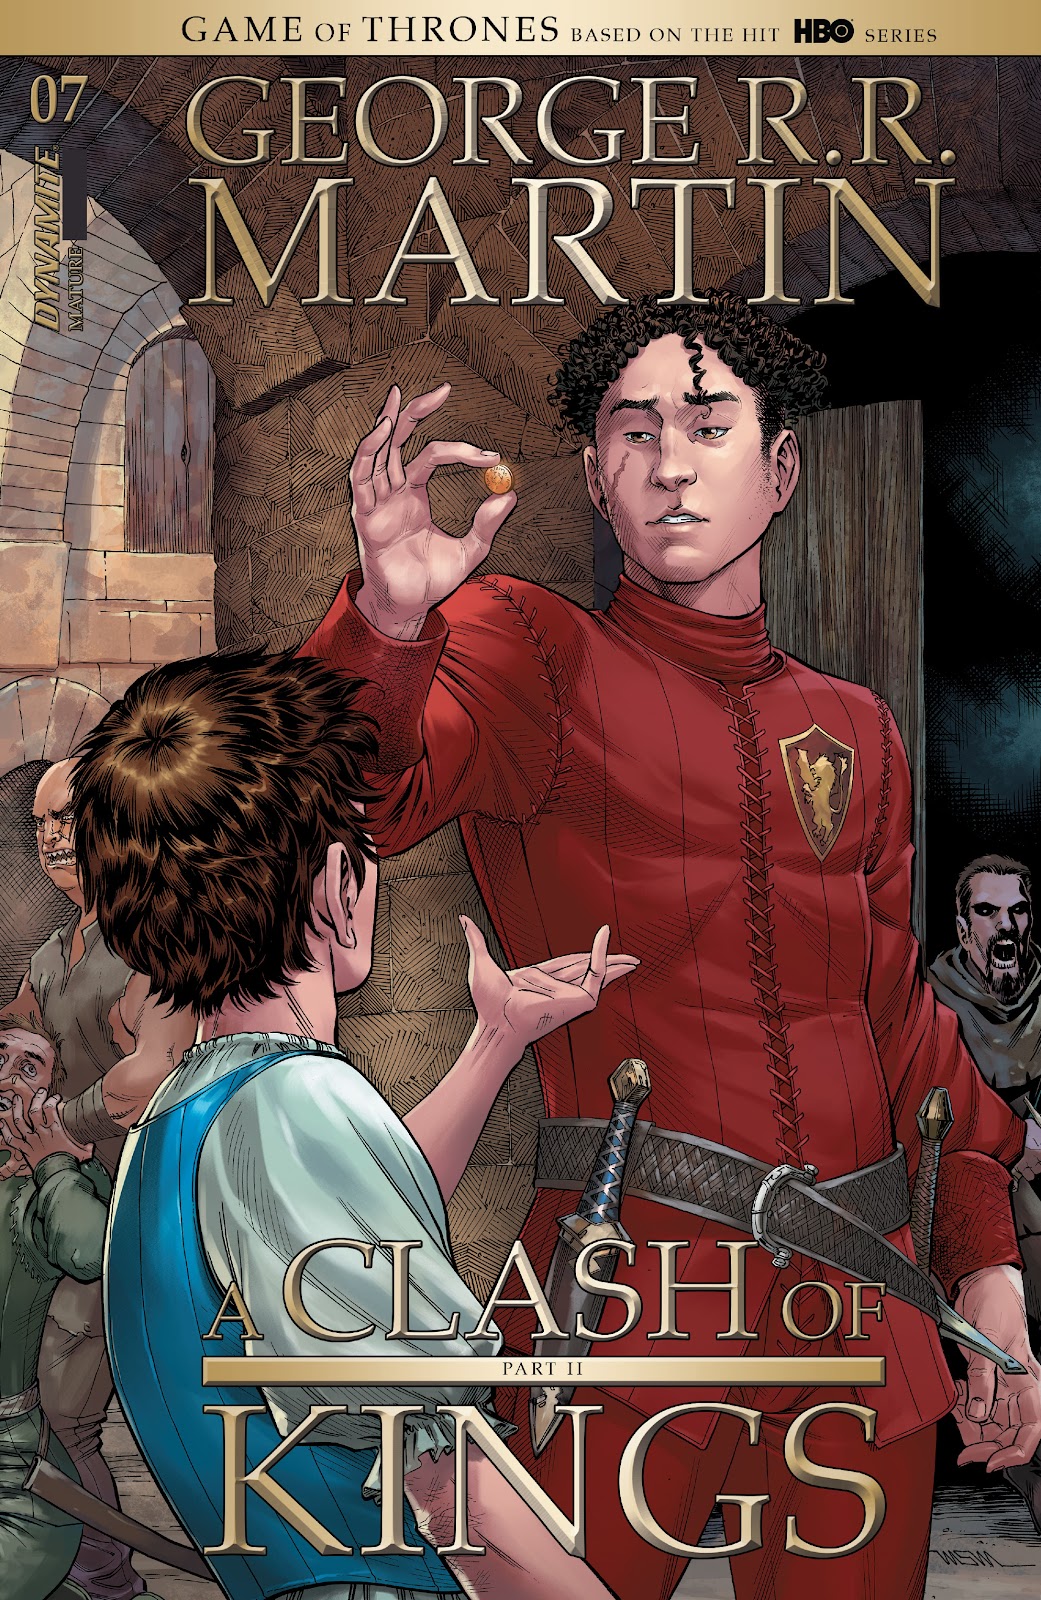 Comic Book Preview - George R.R. Martin's A Clash of Kings #11